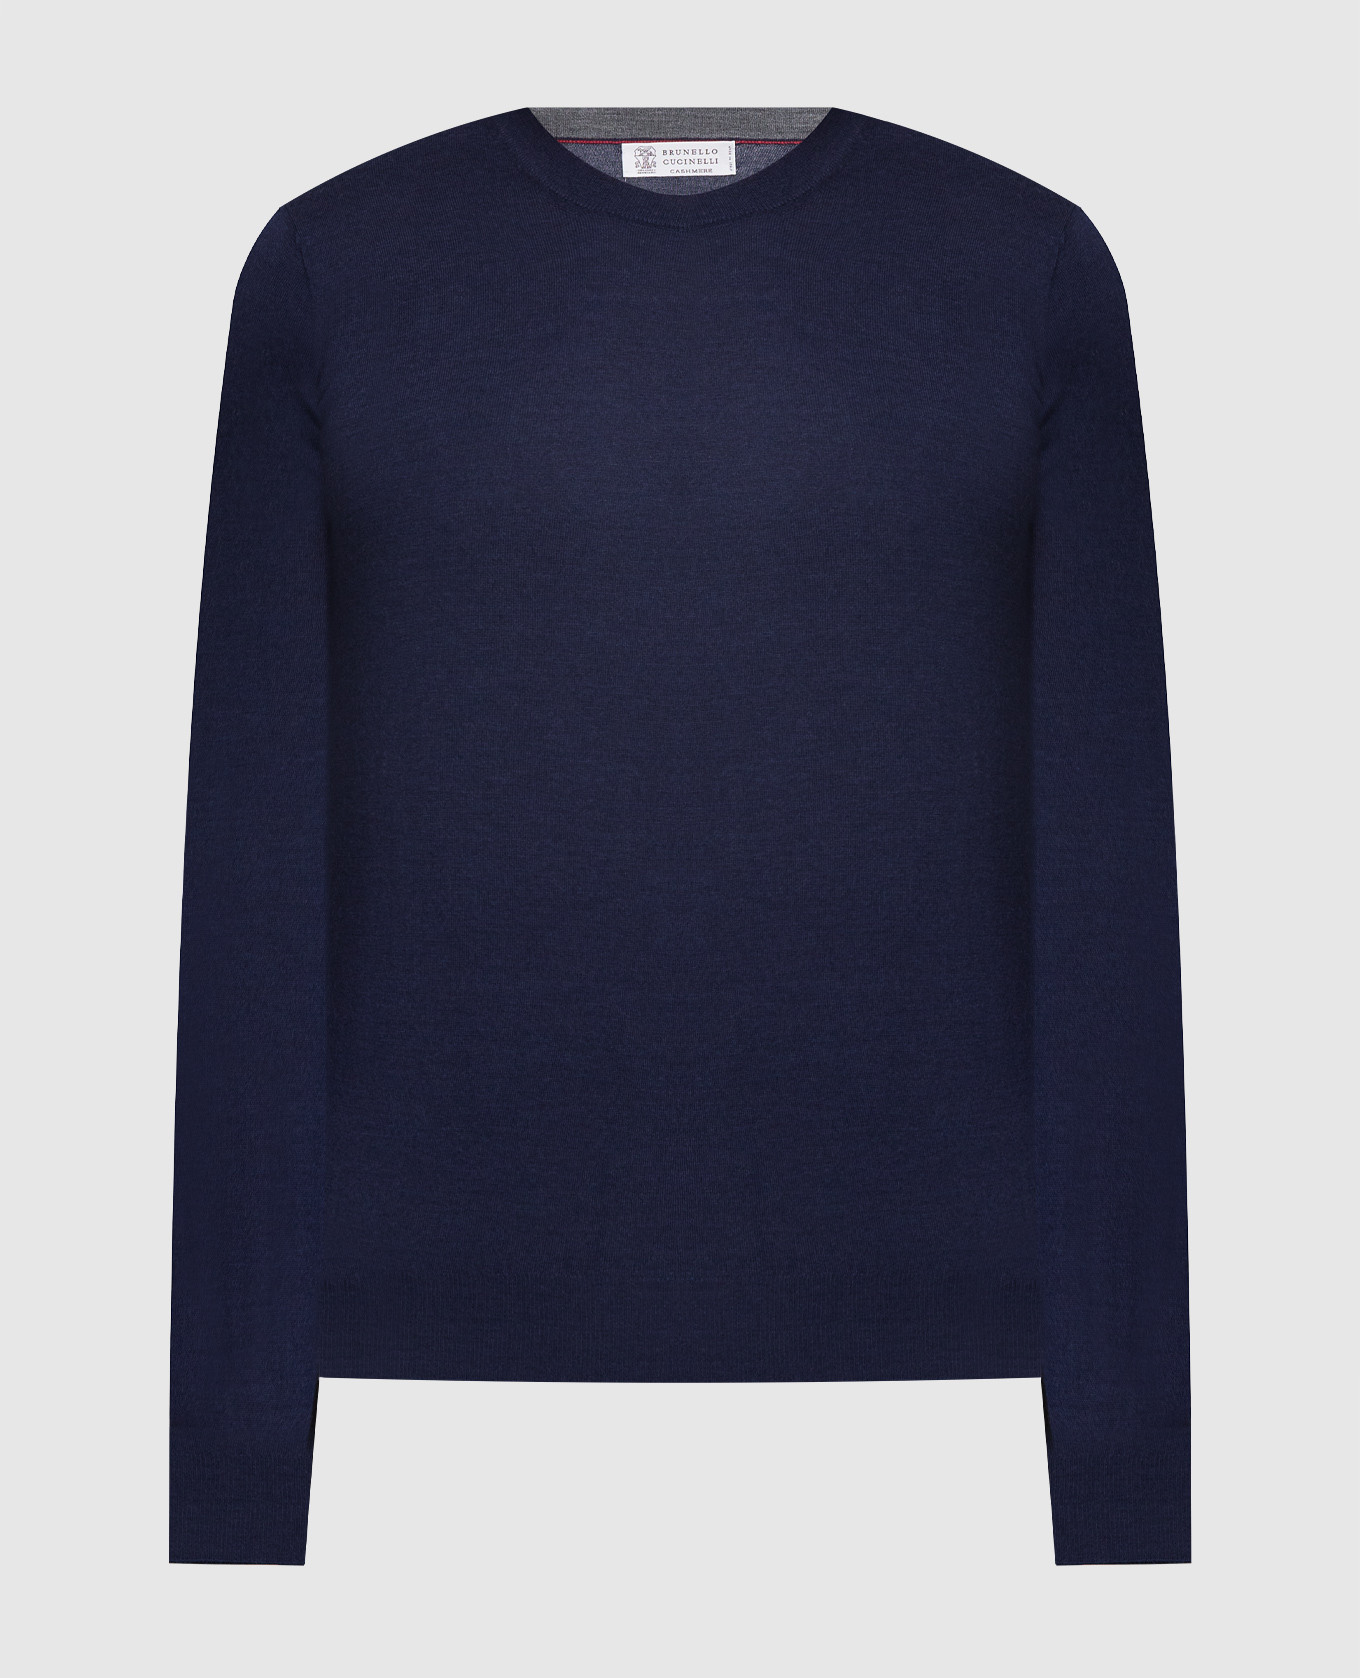 Blue wool and cashmere jumper